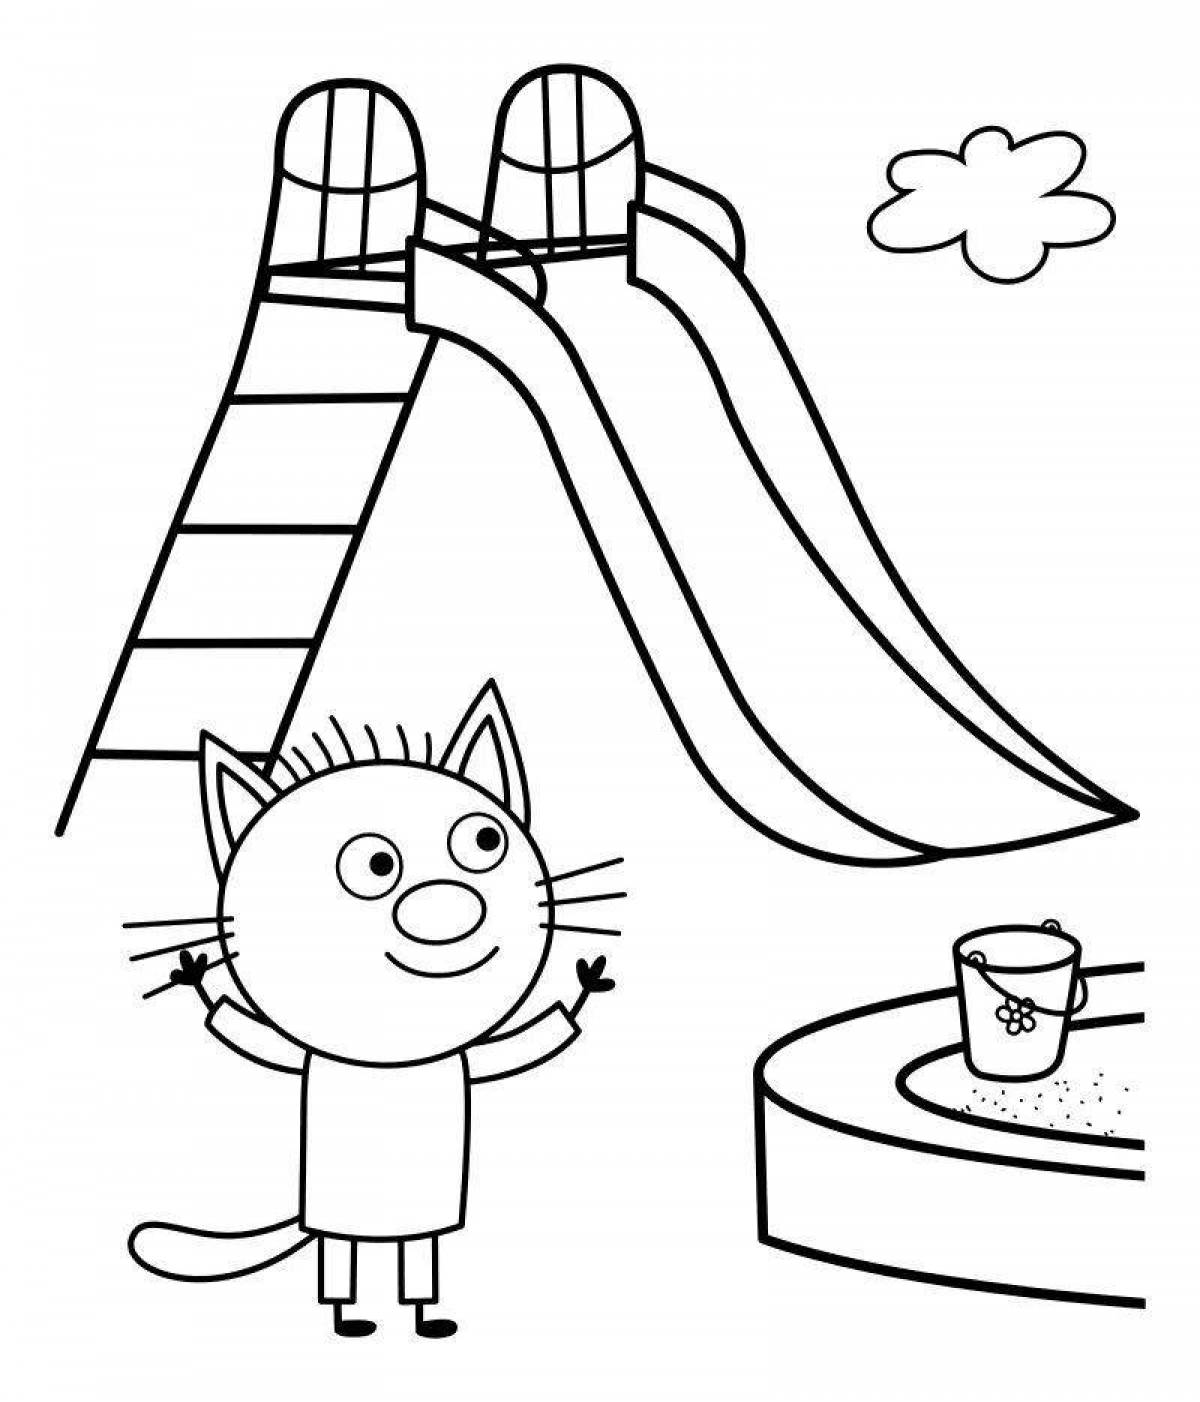 Colorful chasing three cats coloring page